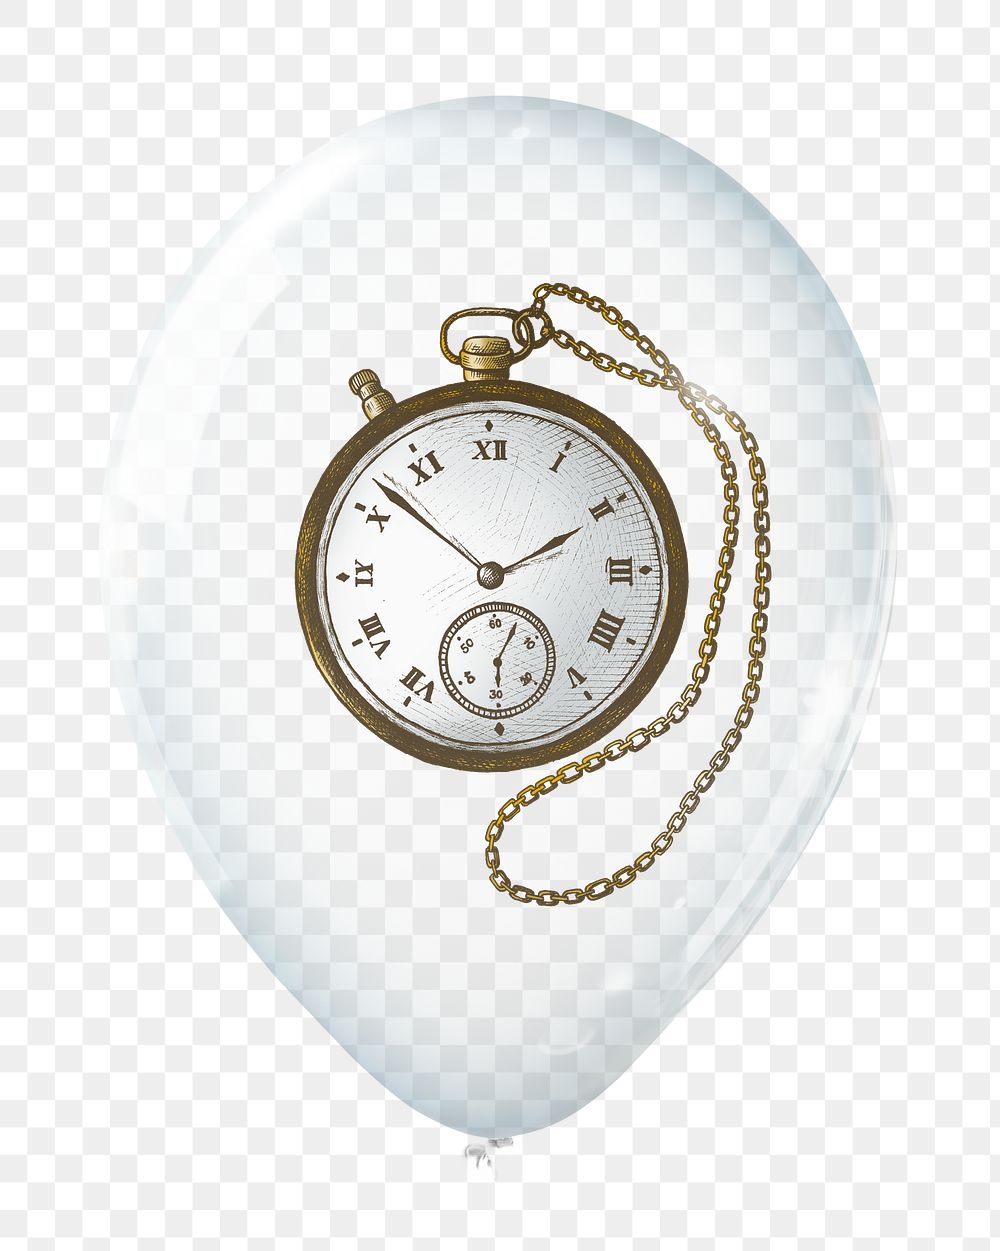 Pocket watch png, object in clear balloon, transparent background